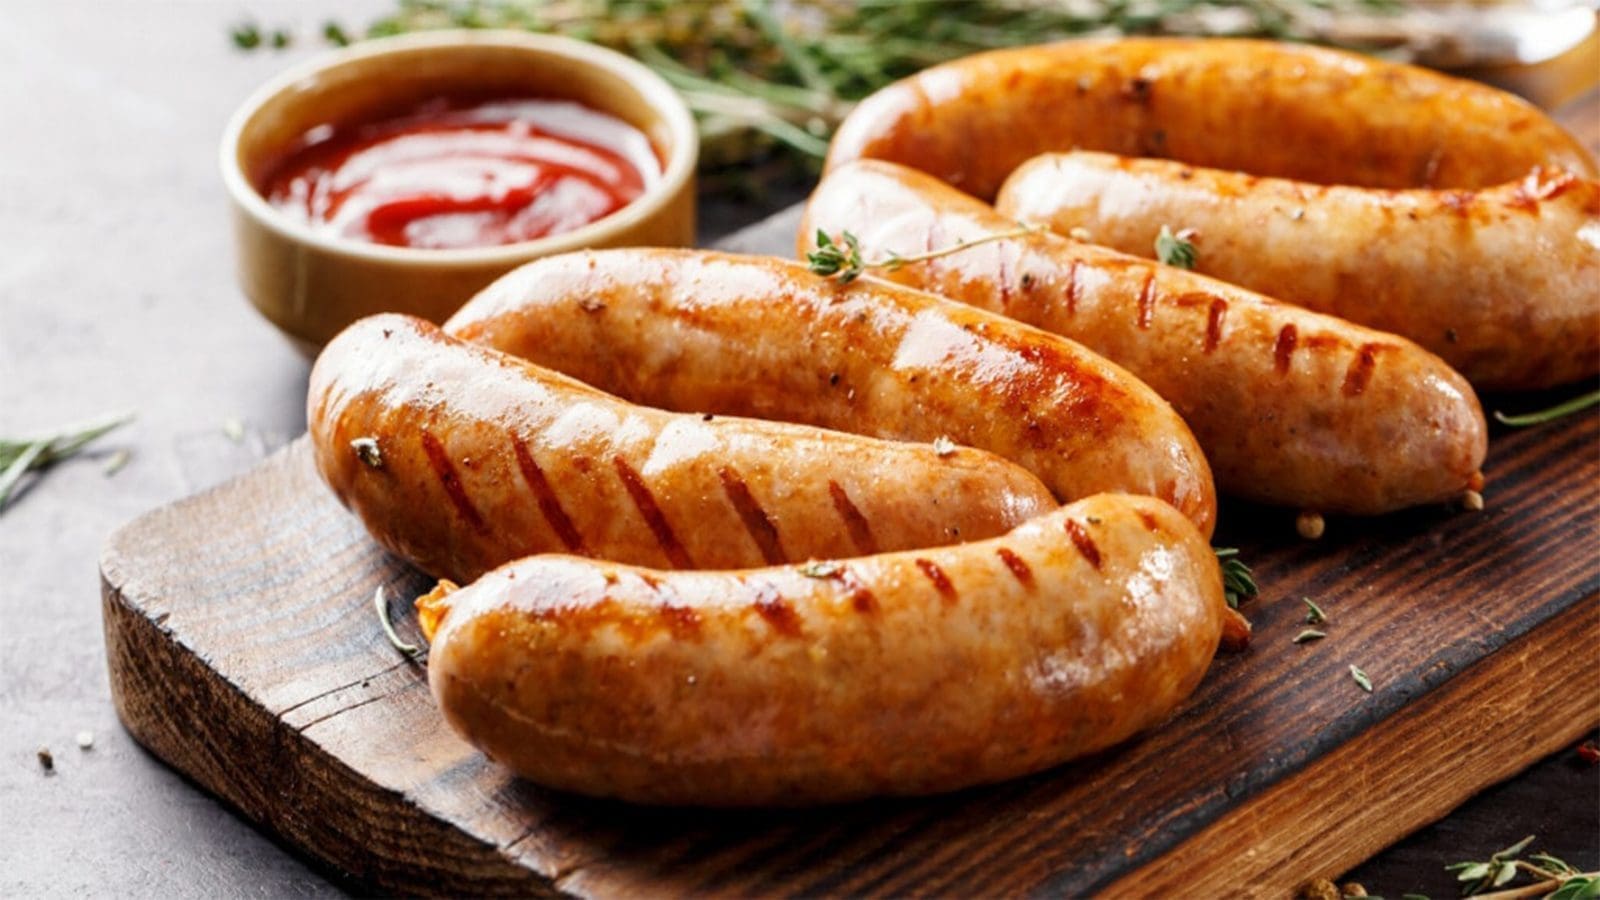 Malaysia probes Thailand’s report on toxic levels of nitrite in sausages